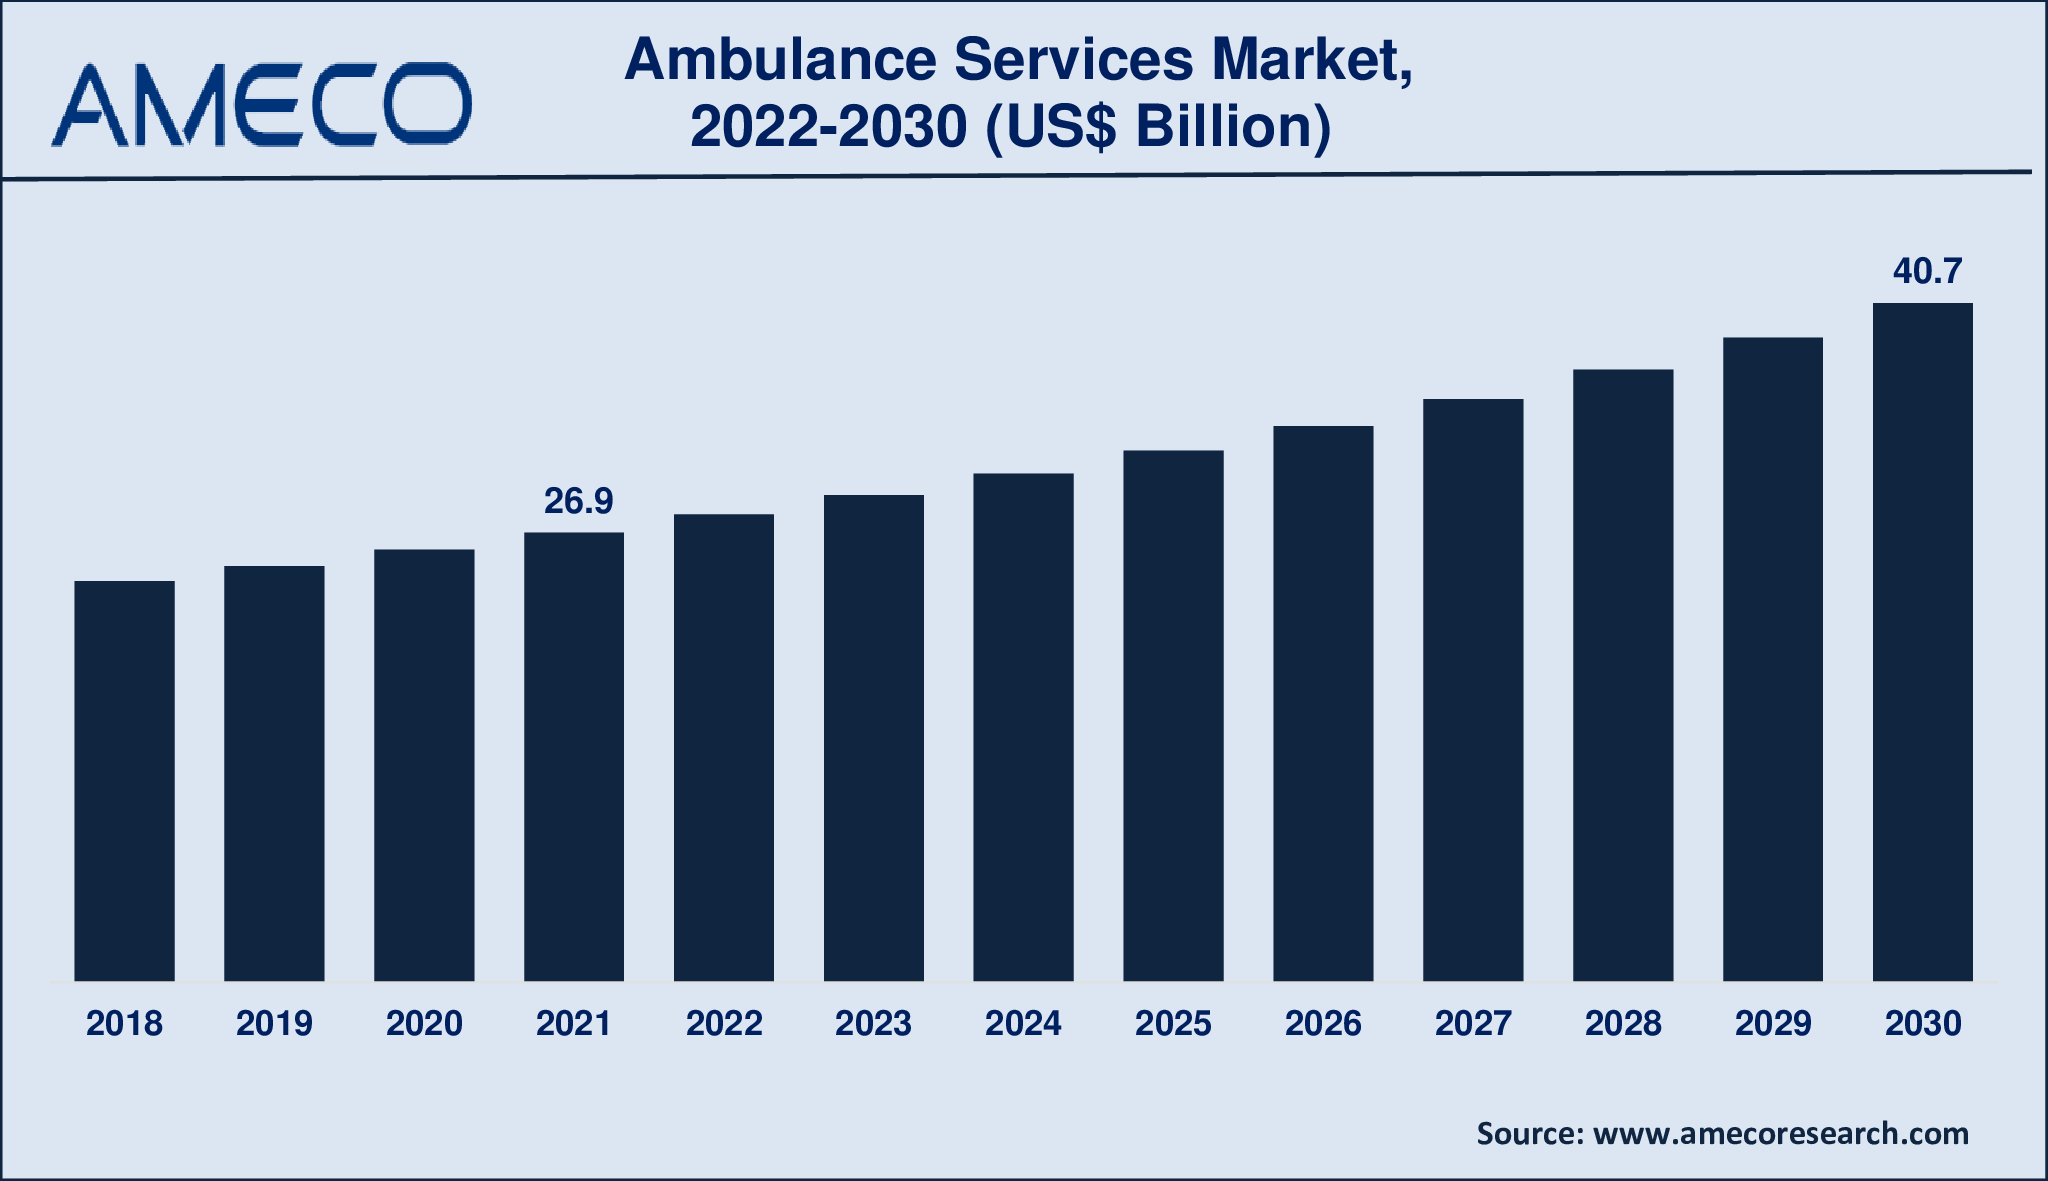 Ambulance Services Market Size, Share, Growth, Trends, and Forecast 2022-2030